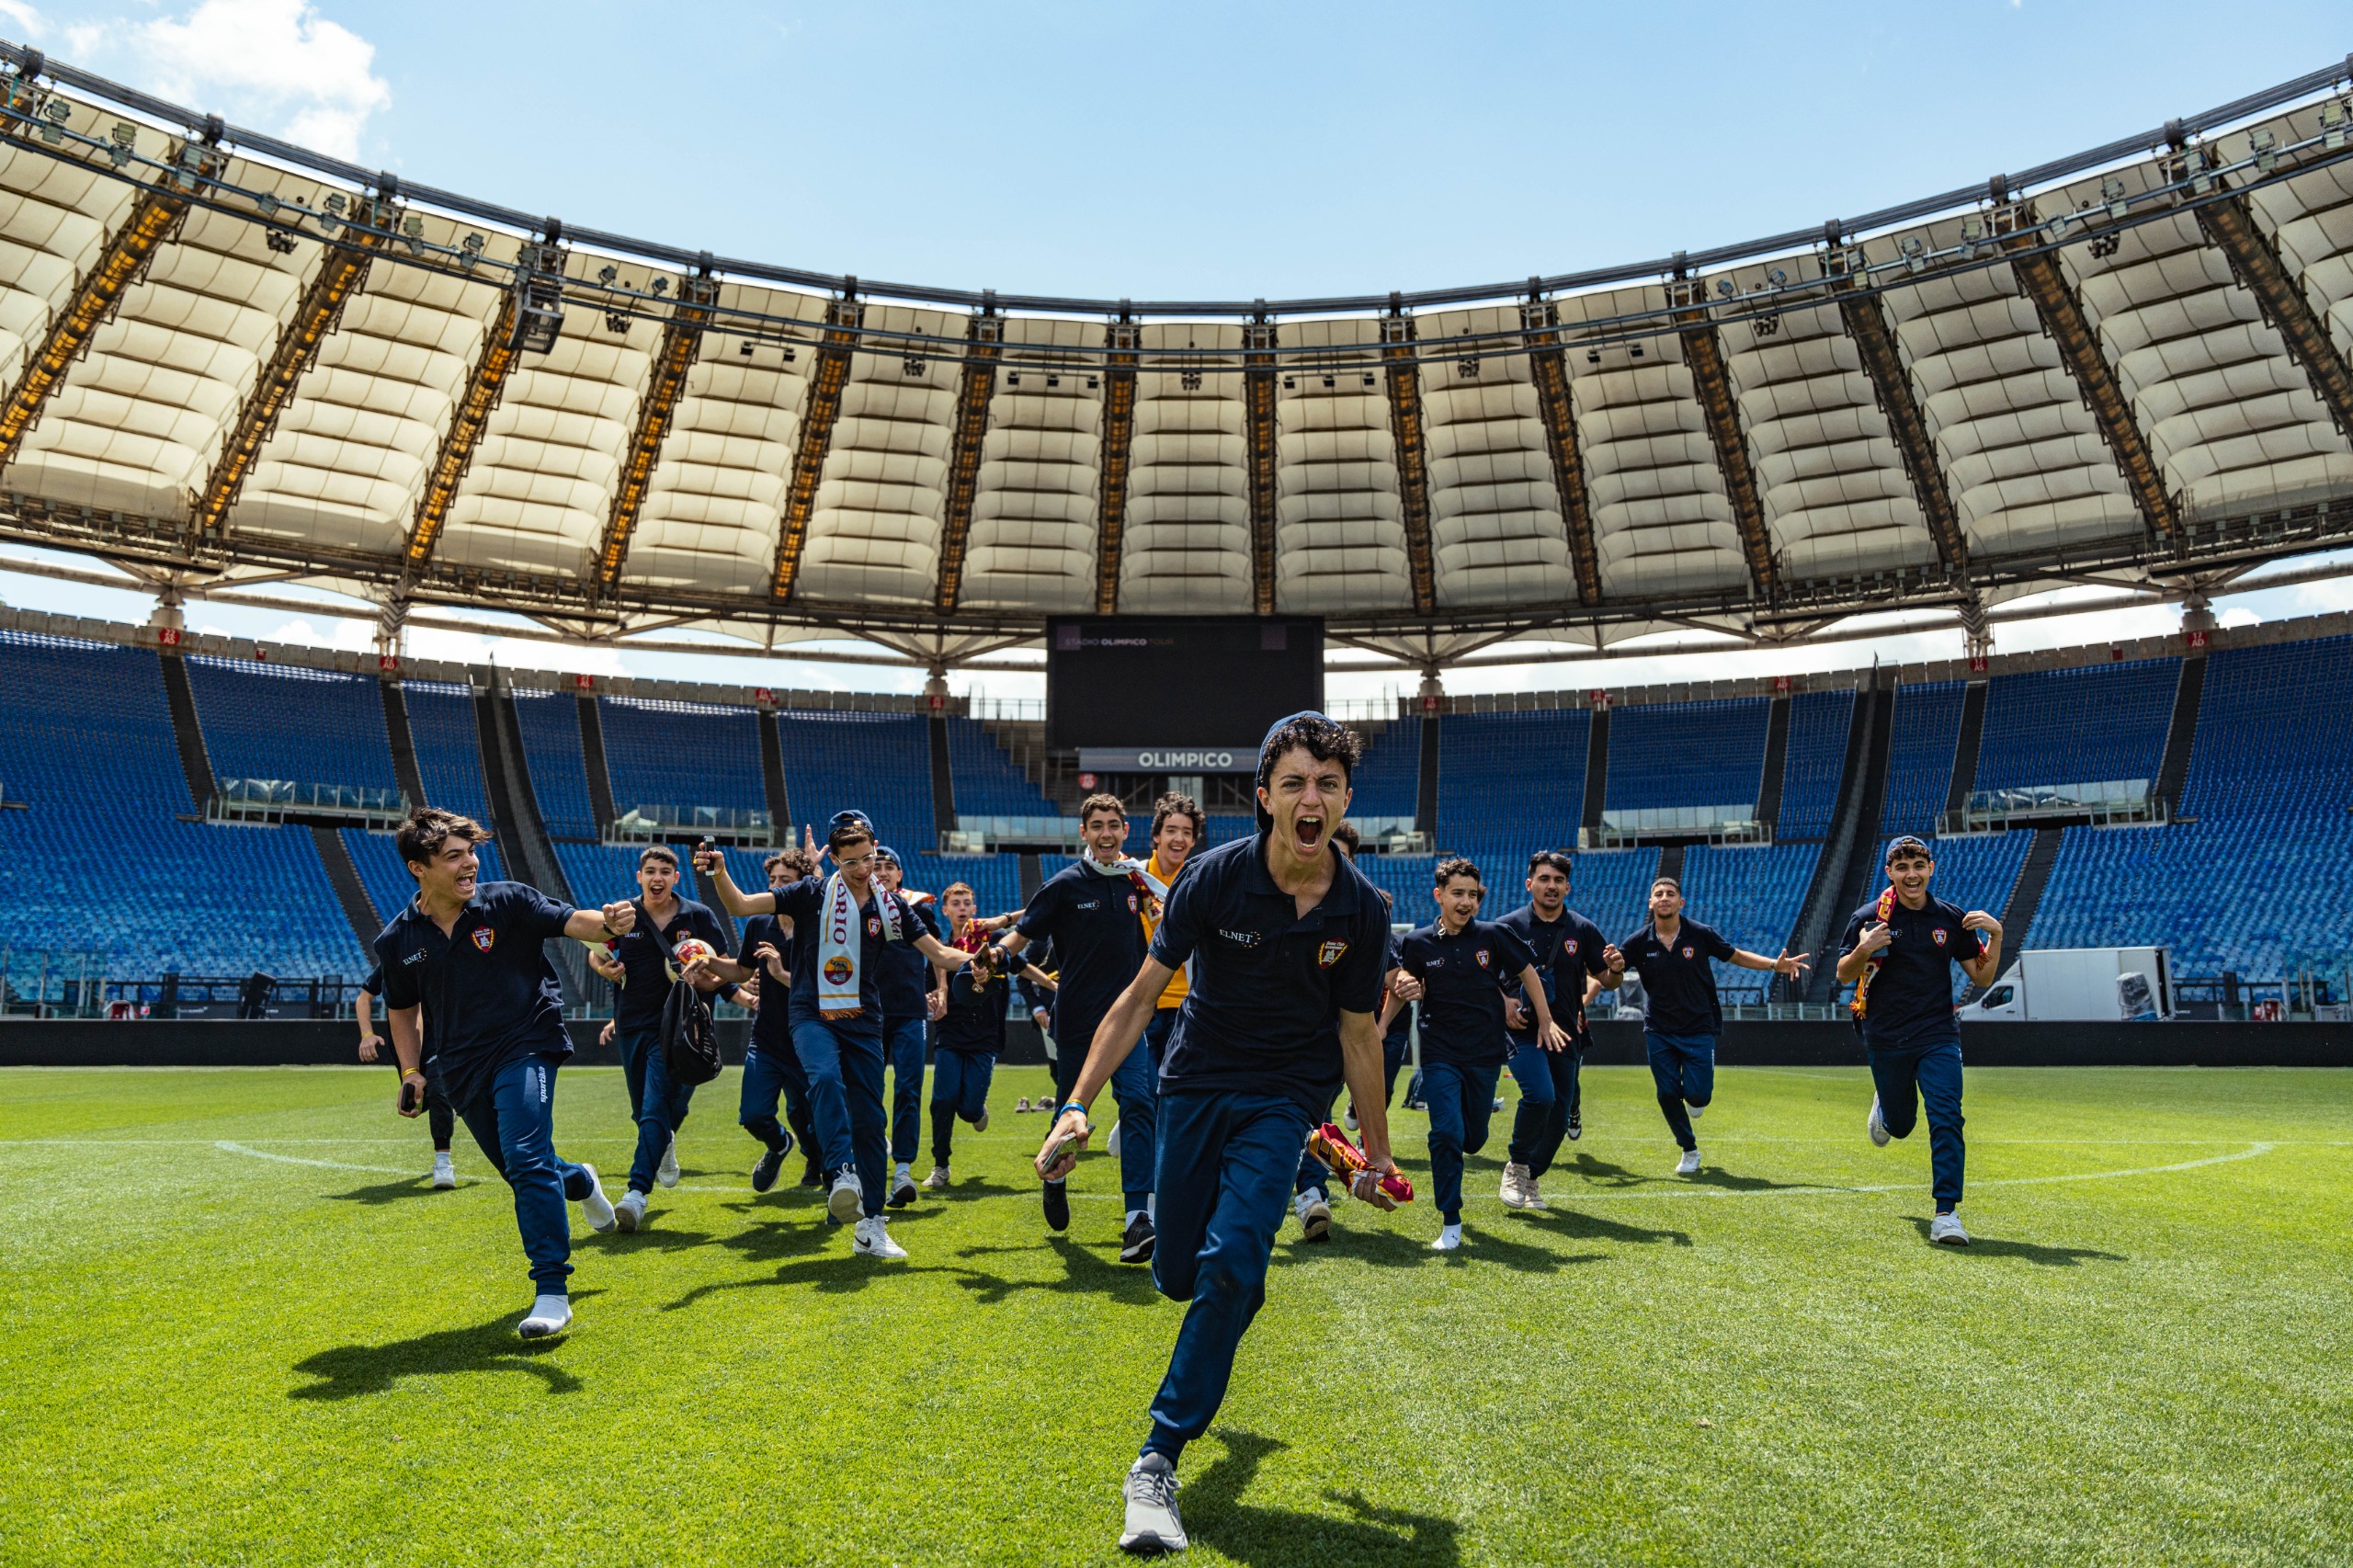 Sports past obstacles: Roma Club Gerusalemme visits the Olimpico